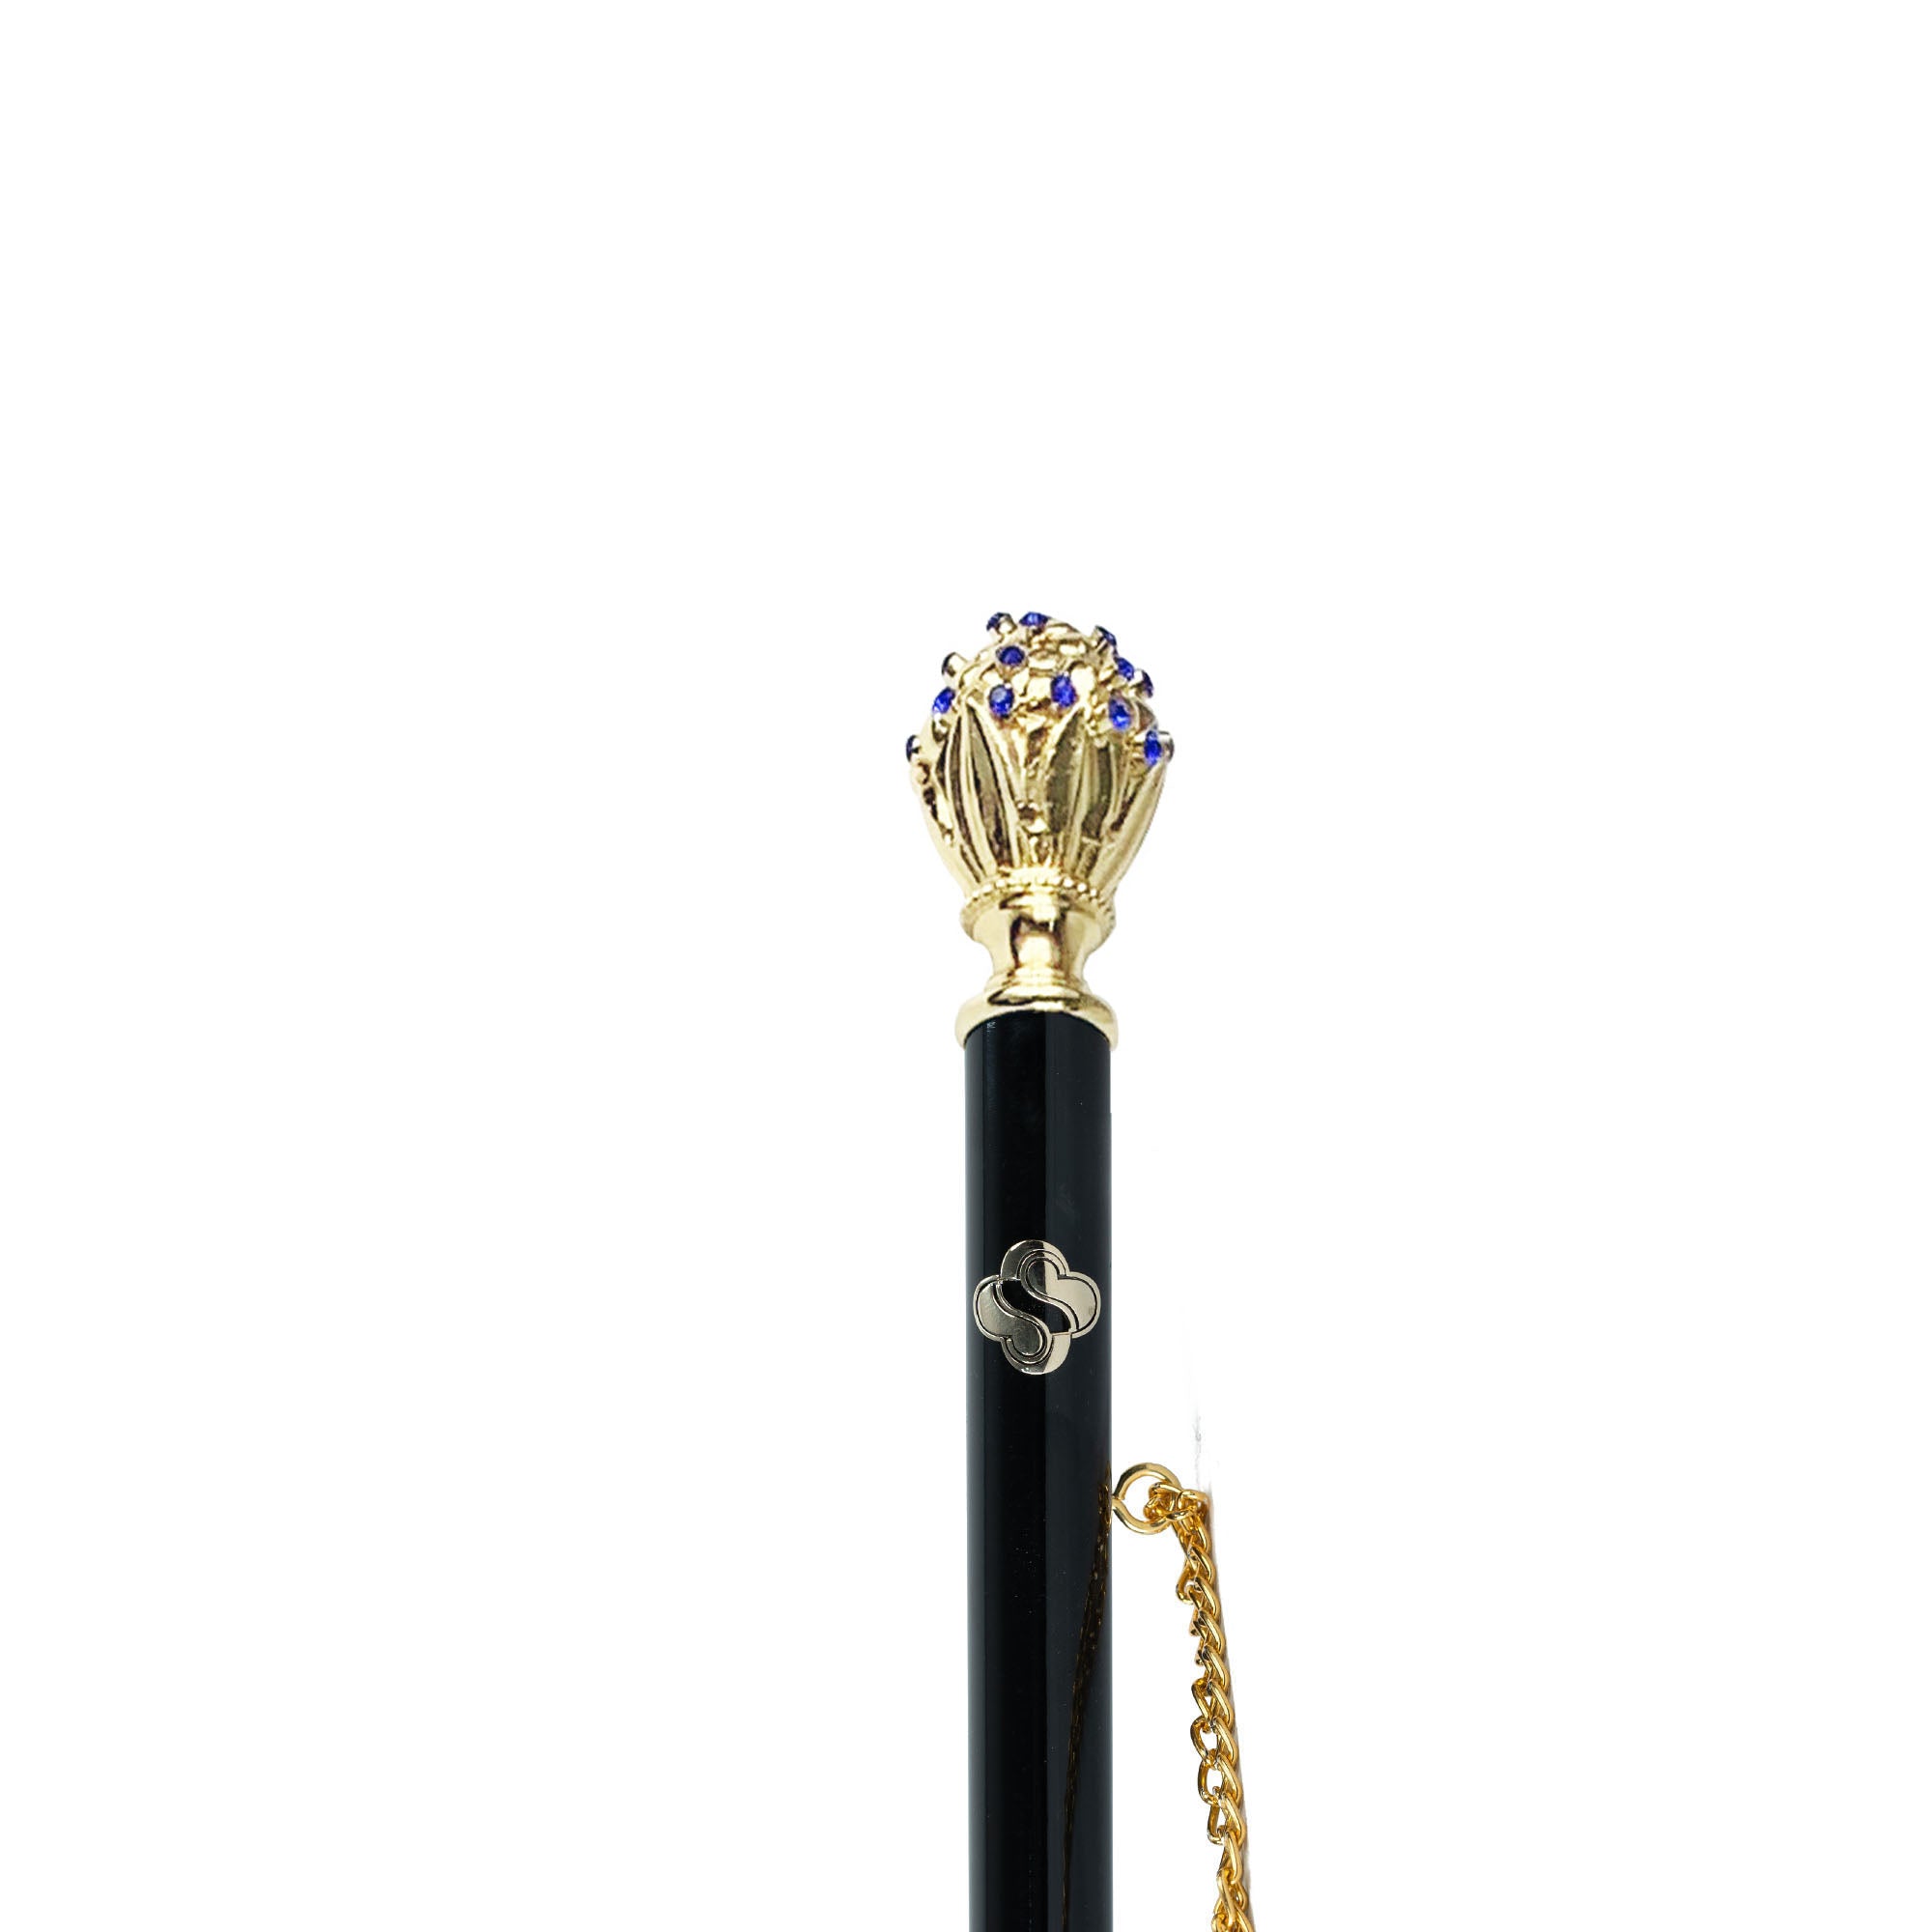 Artisanal Beauty: Luxury Shoehorns with Sapphire Crystals